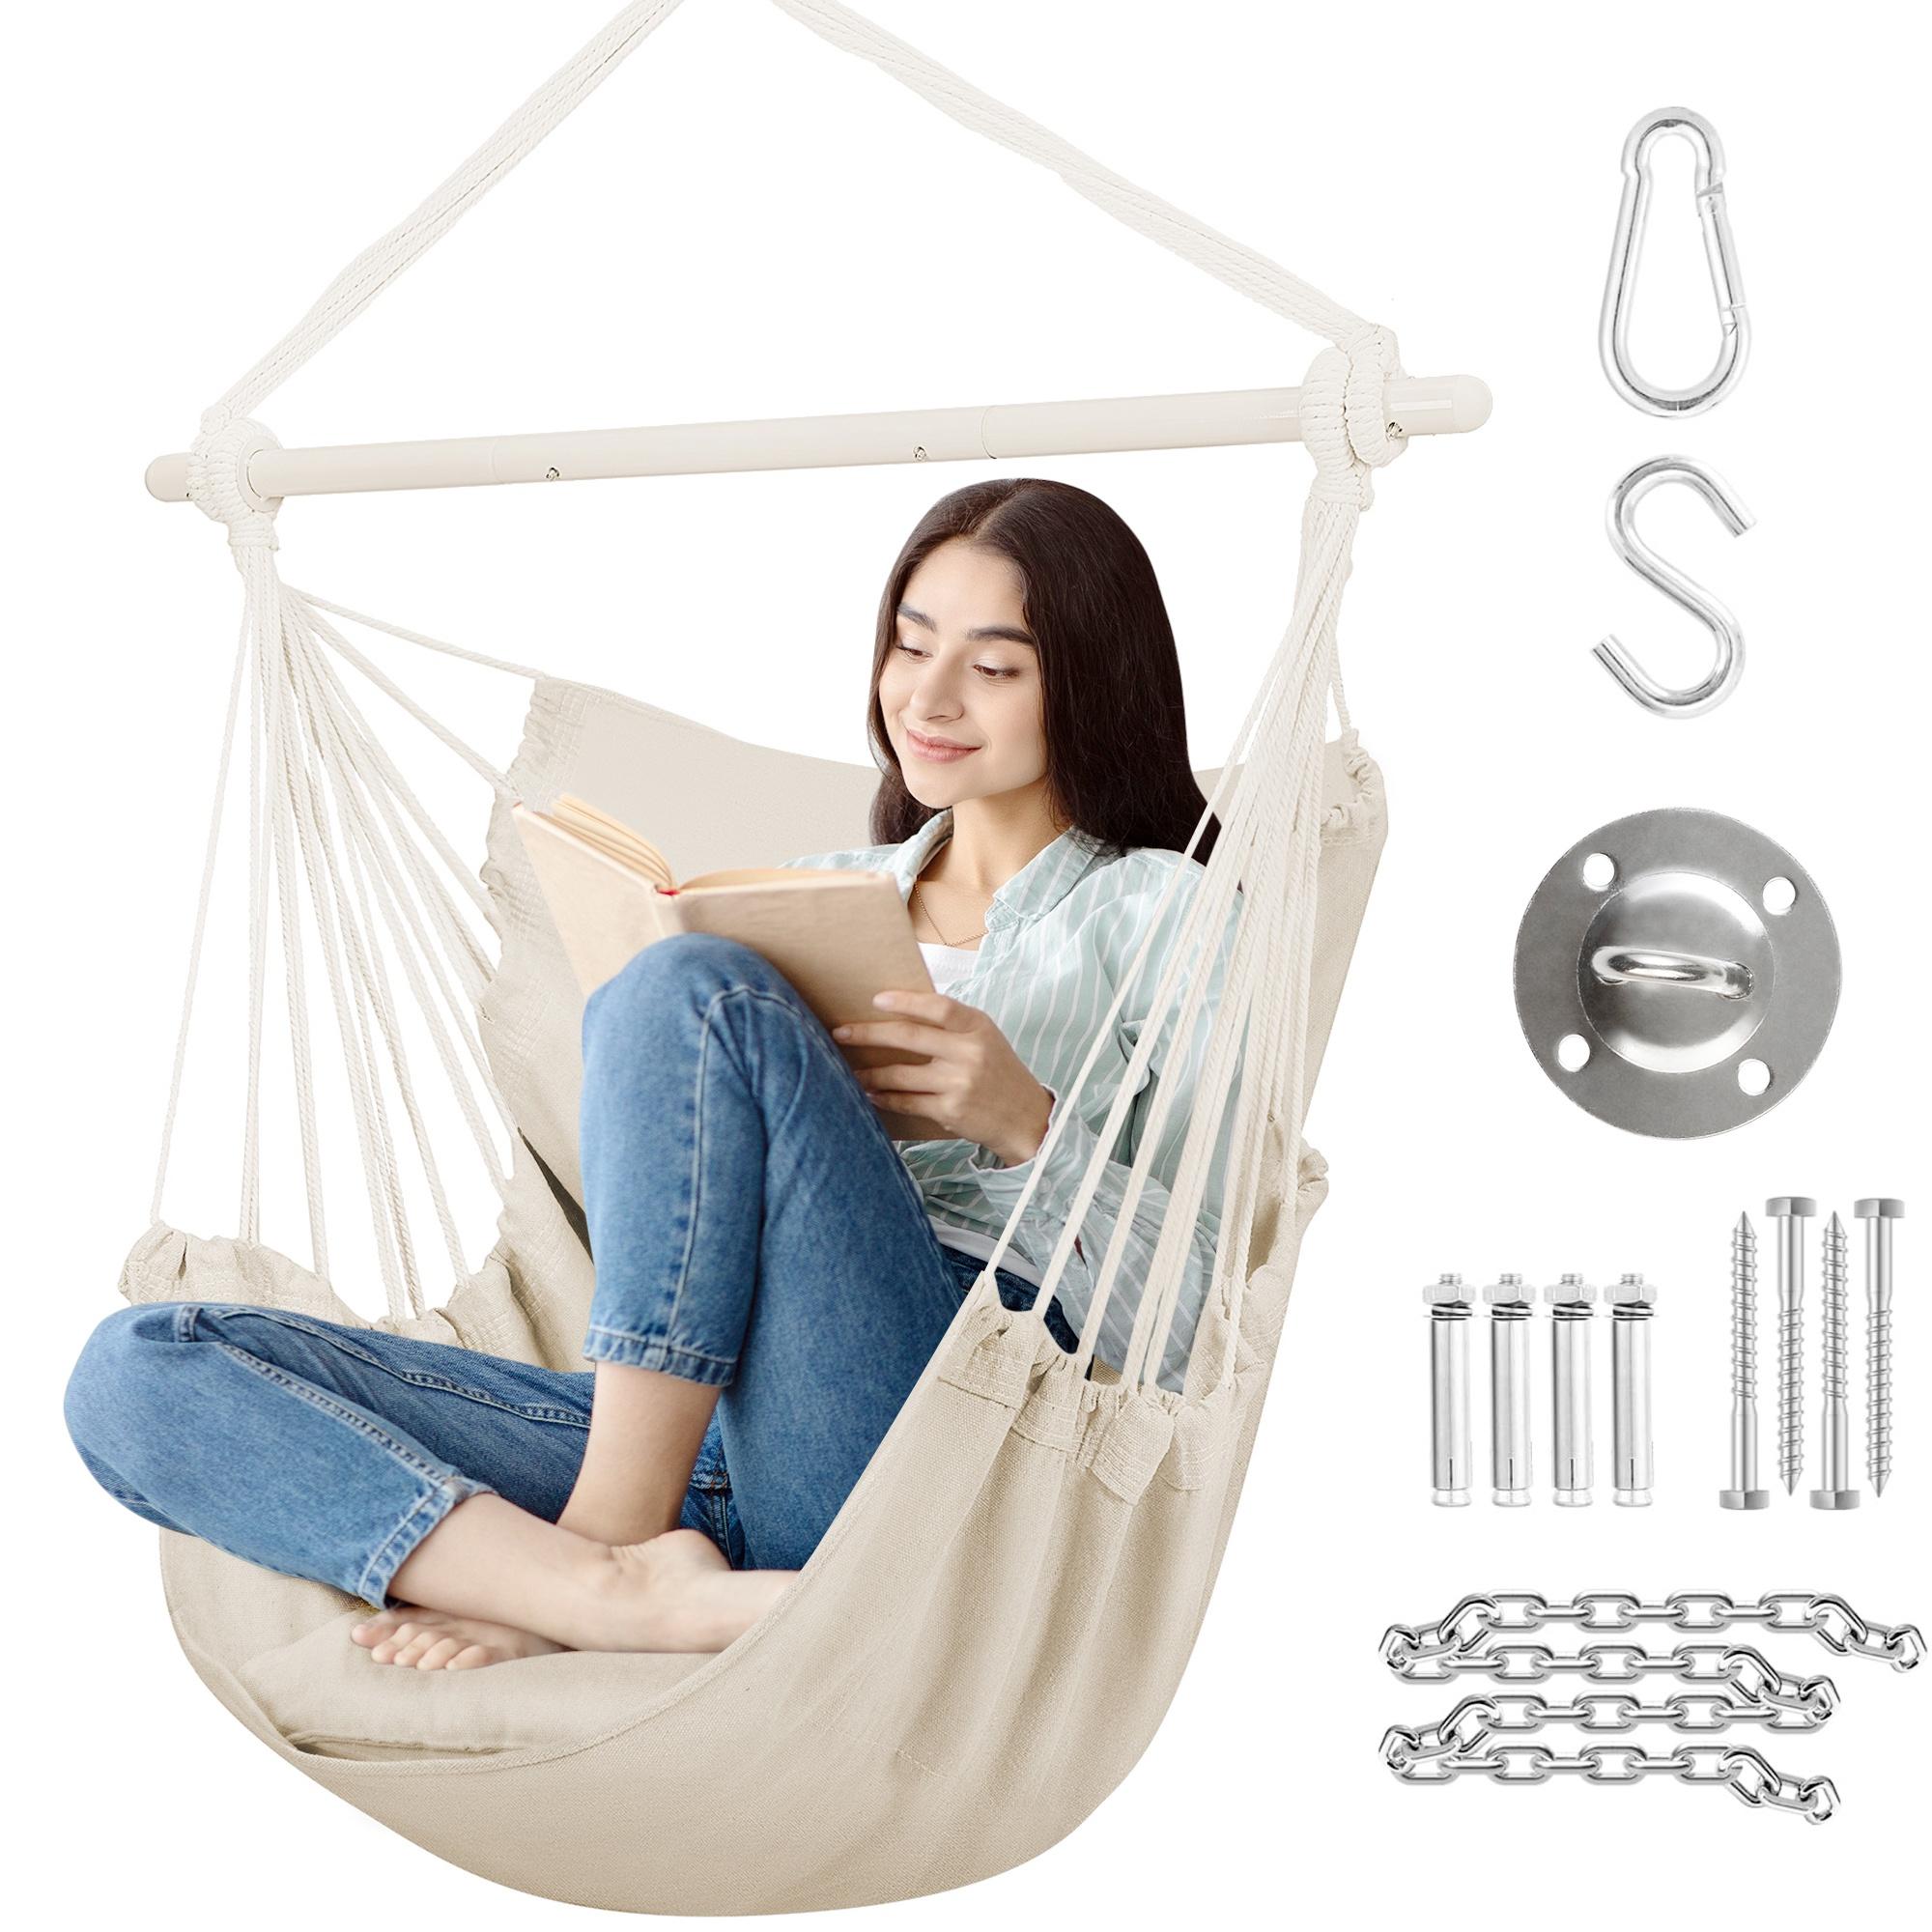 Large Hammock Chair Swing, Relax Hanging Rope Swing Chair with Detachable Metal Support Bar & Two Seat Cushions, Cotton Hammock Chair Swing Seat for Yard Bedroom Patio Porch Indoor Outdoor - image 1 of 10